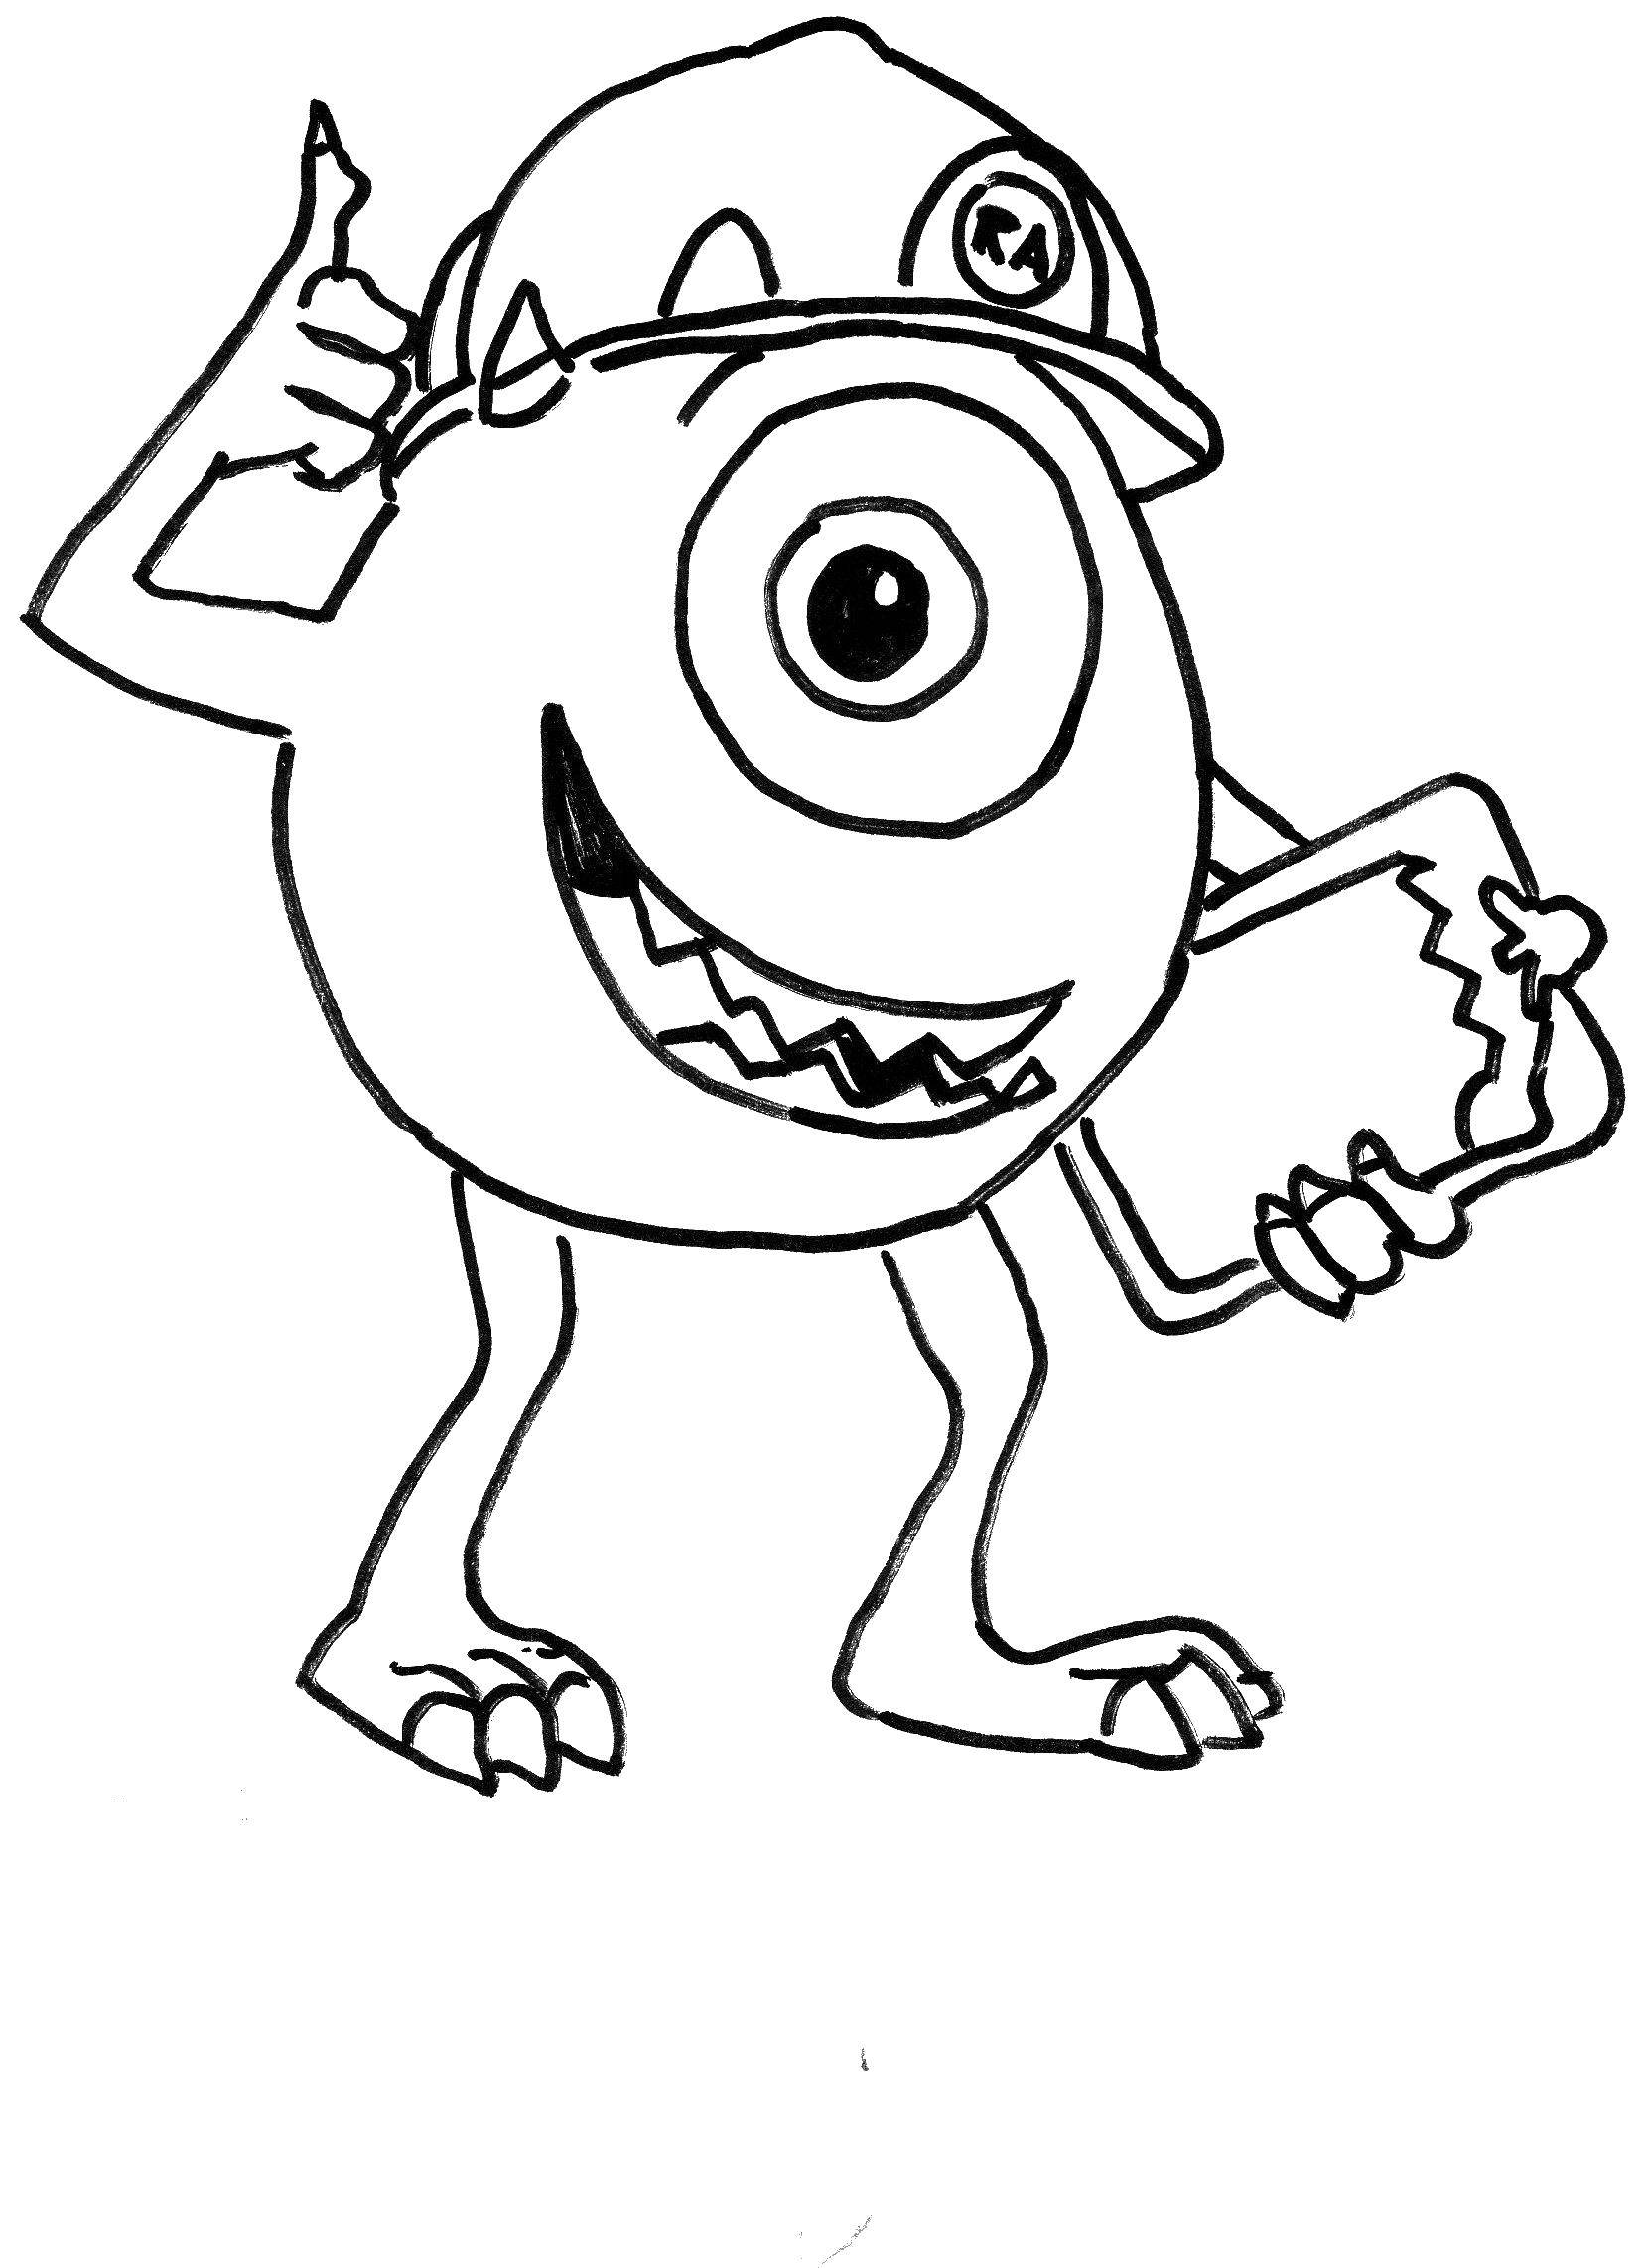 Coloring Mike wazowski and helmet. Category coloring. Tags:  Mike, helmet, monster, folder.